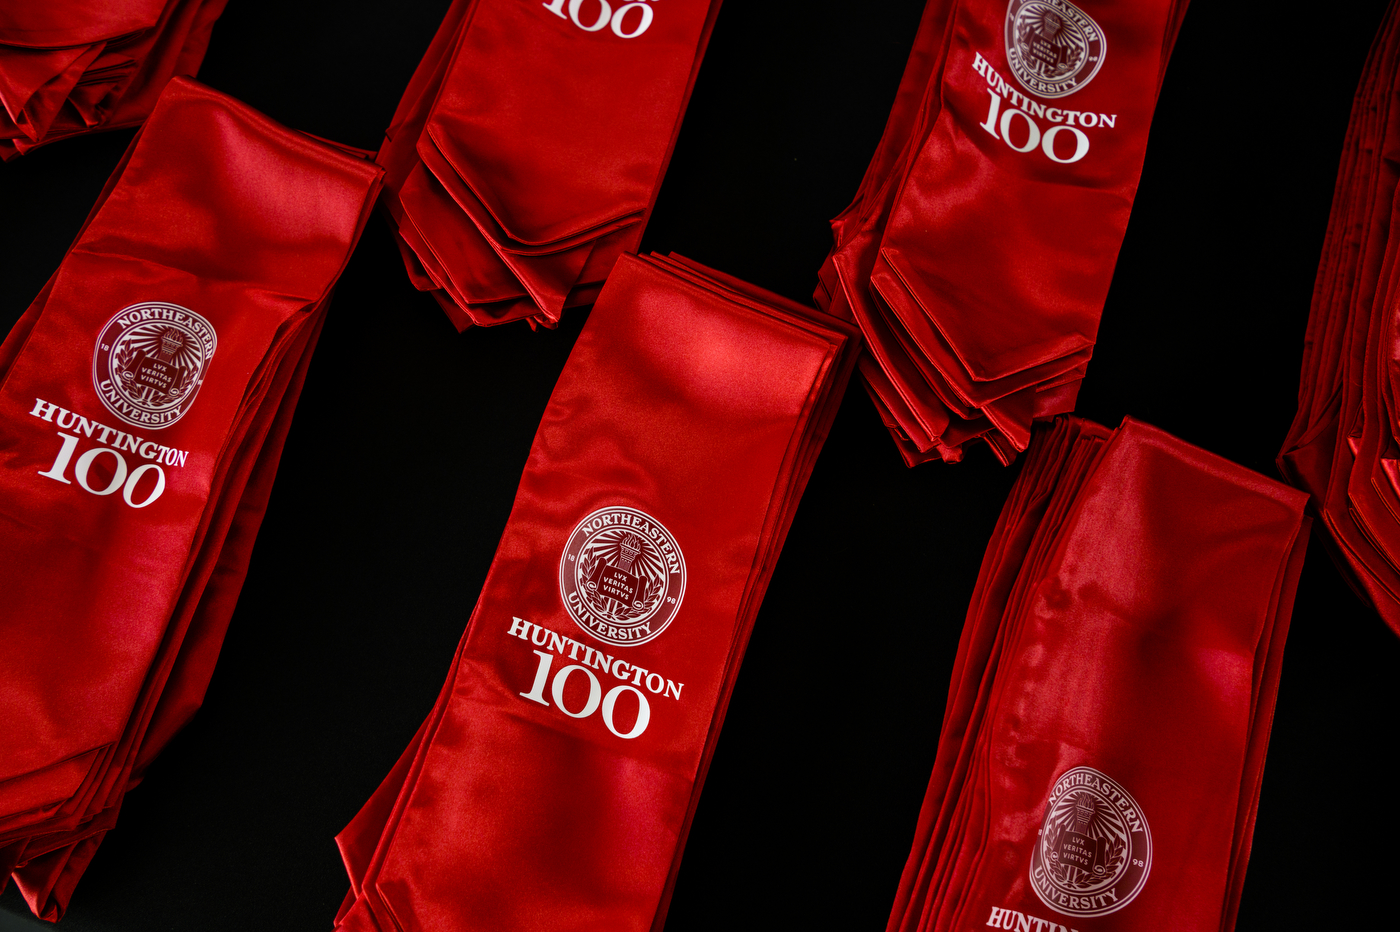 Red sashes embroidered with Huntington 100 seal are displayed on a table